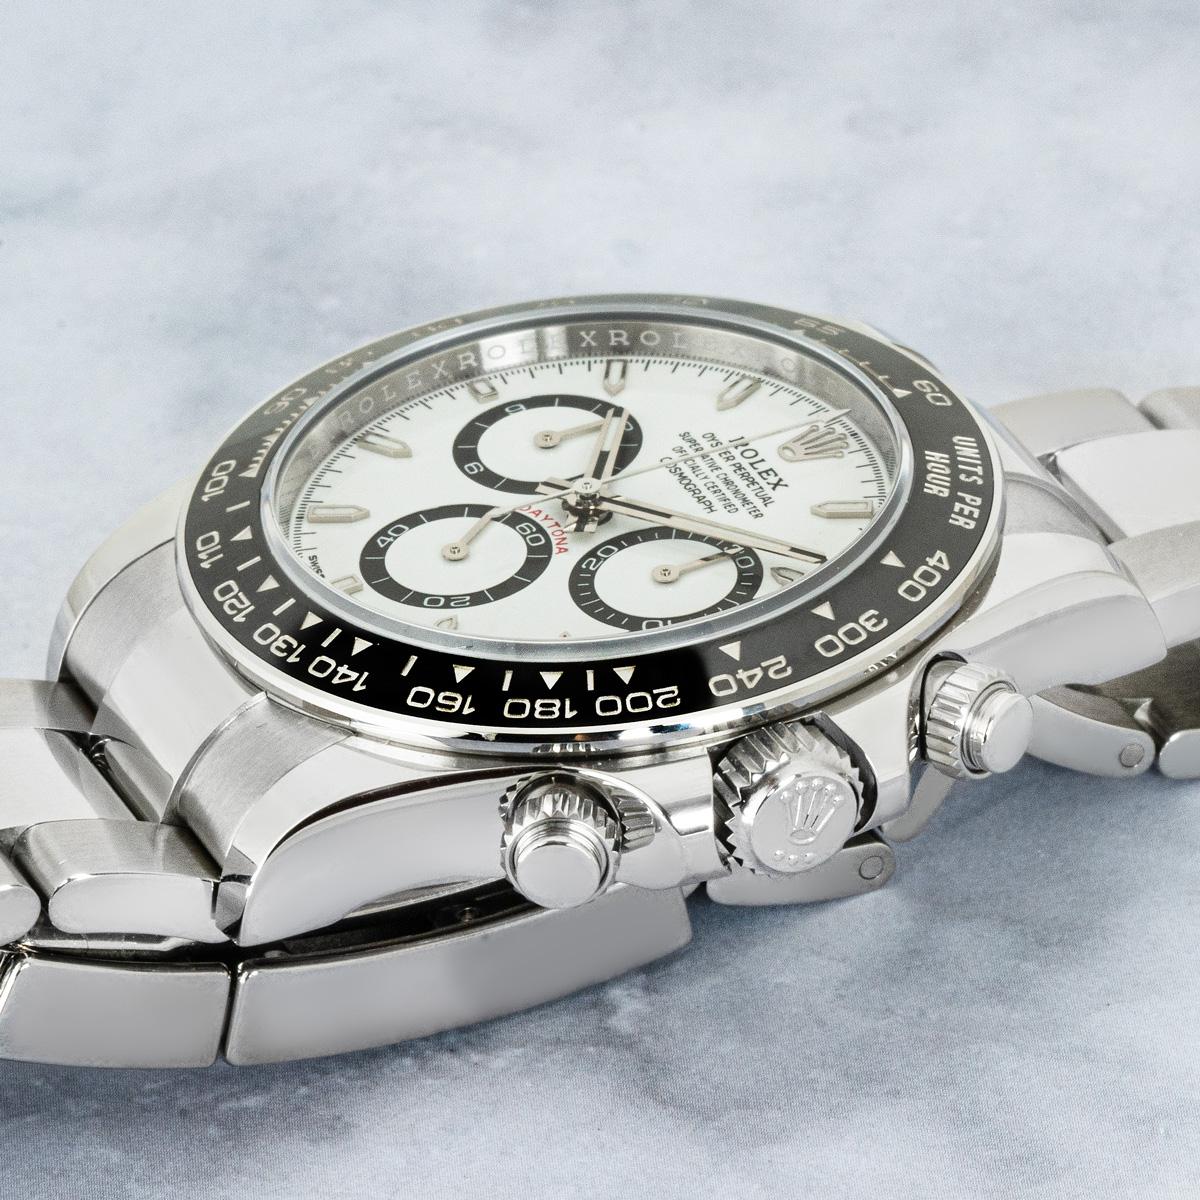 The latest Oystersteel Daytona release from Rolex. Featuring a white dial complemented by a black ceramic bezel, with features including three chronograph counters and a tachymetric scale.

Fitted with a scratch-resistant sapphire crystal and a